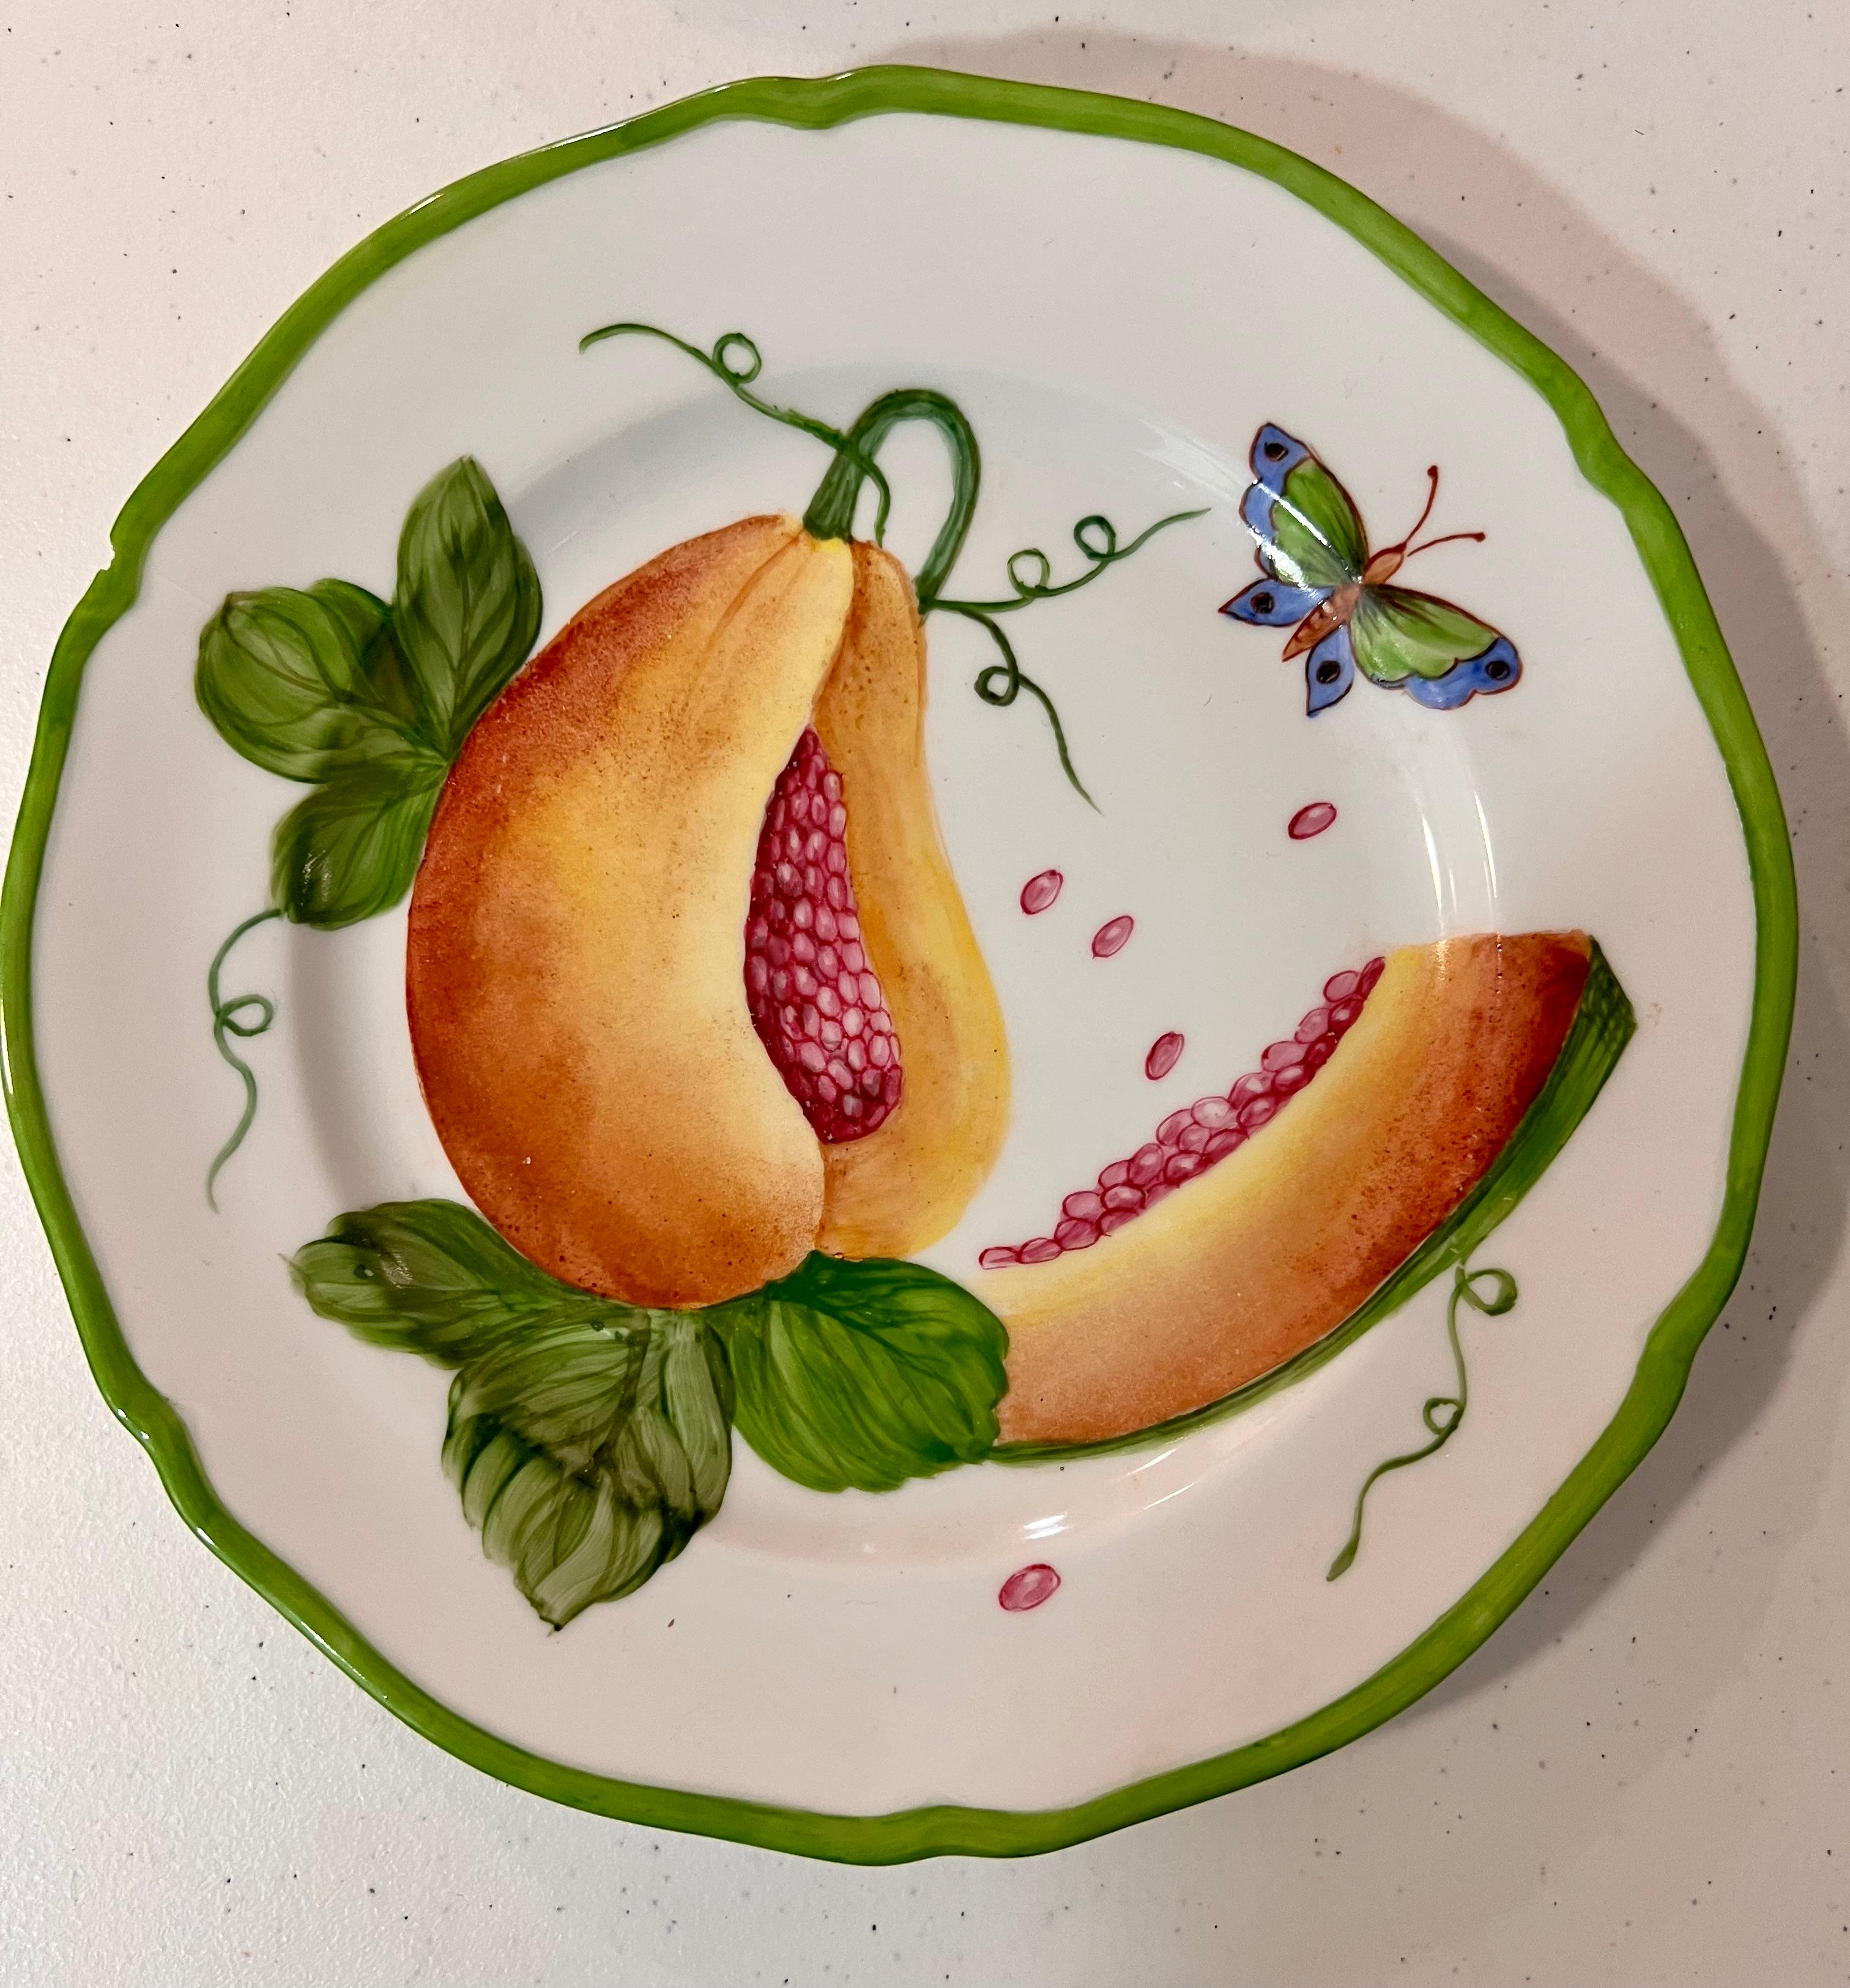 Giovanna Amoruso Manzari hand painted partial table service for Limoges, decorated with fruit, flowers, and butterflies.
Measure 8.66 inches / 22 cm 
* Request info for flatware price for individual plate but if set pirce arranges. 

PRADERA is